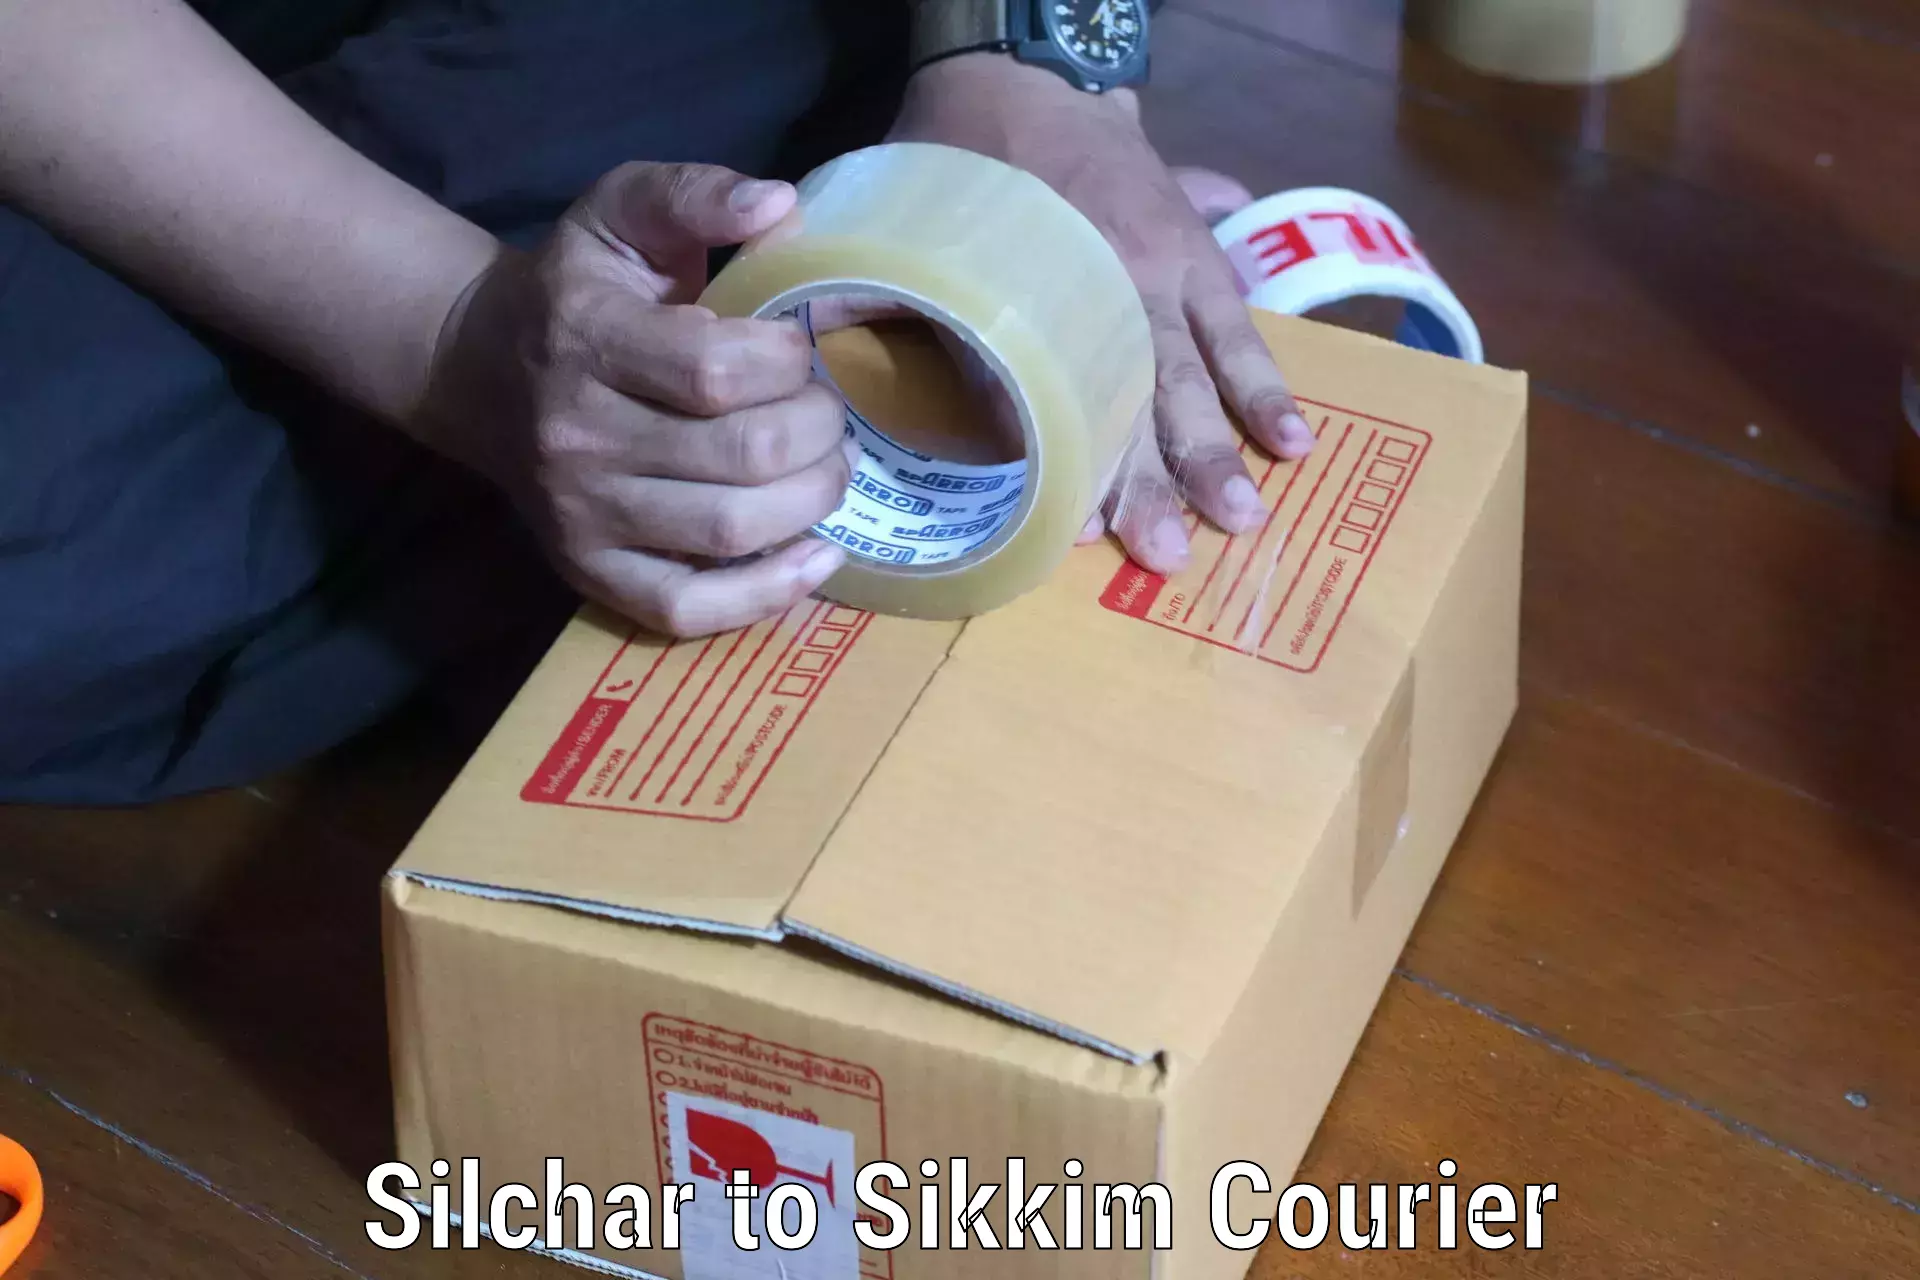 Discounted shipping Silchar to Pelling